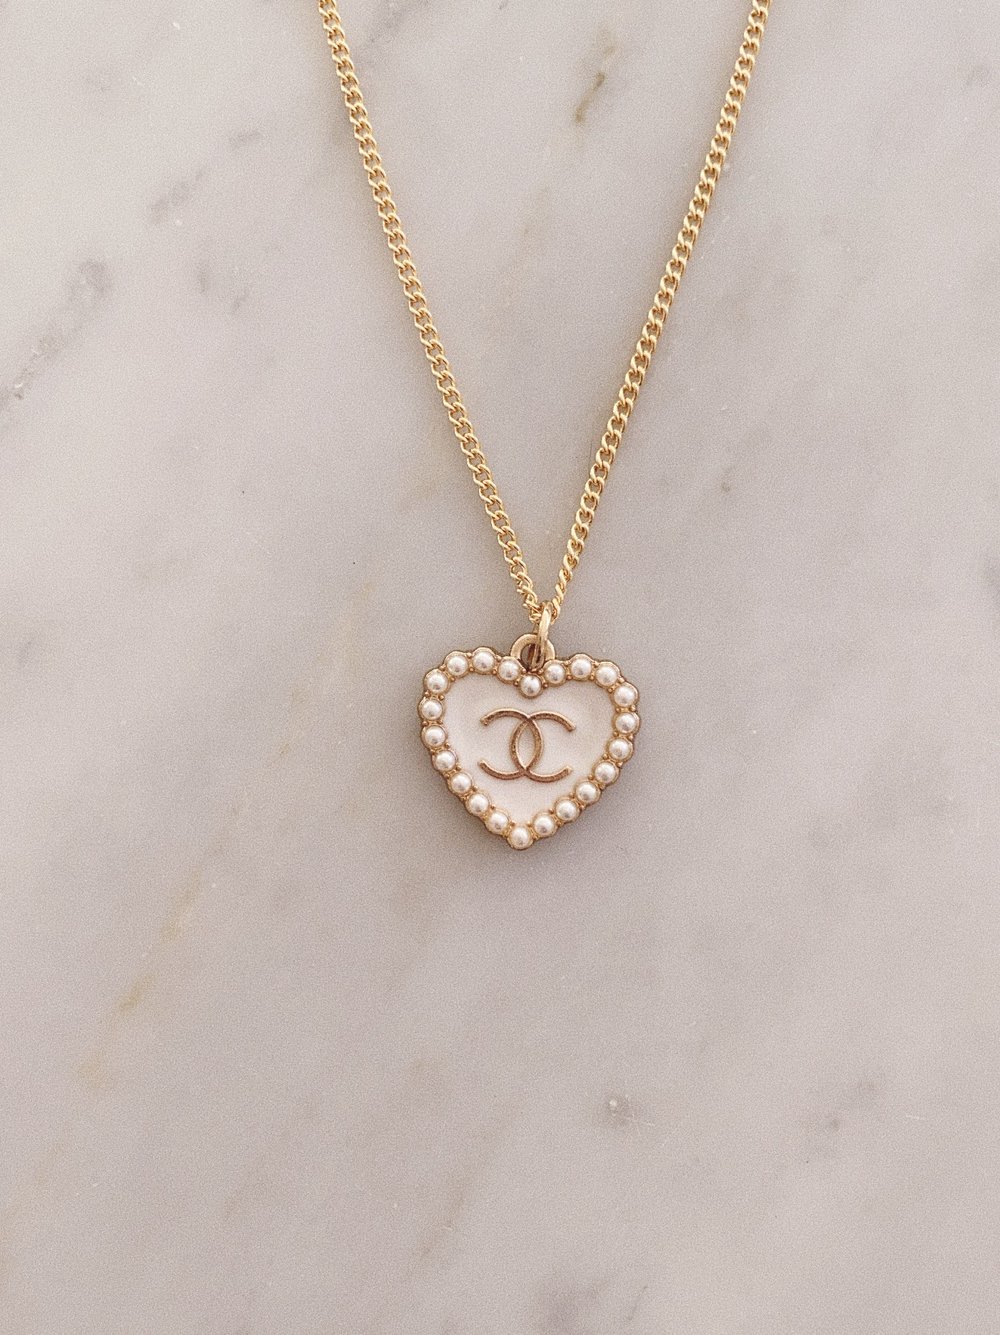 Gold Necklace with White Heart Pendant —